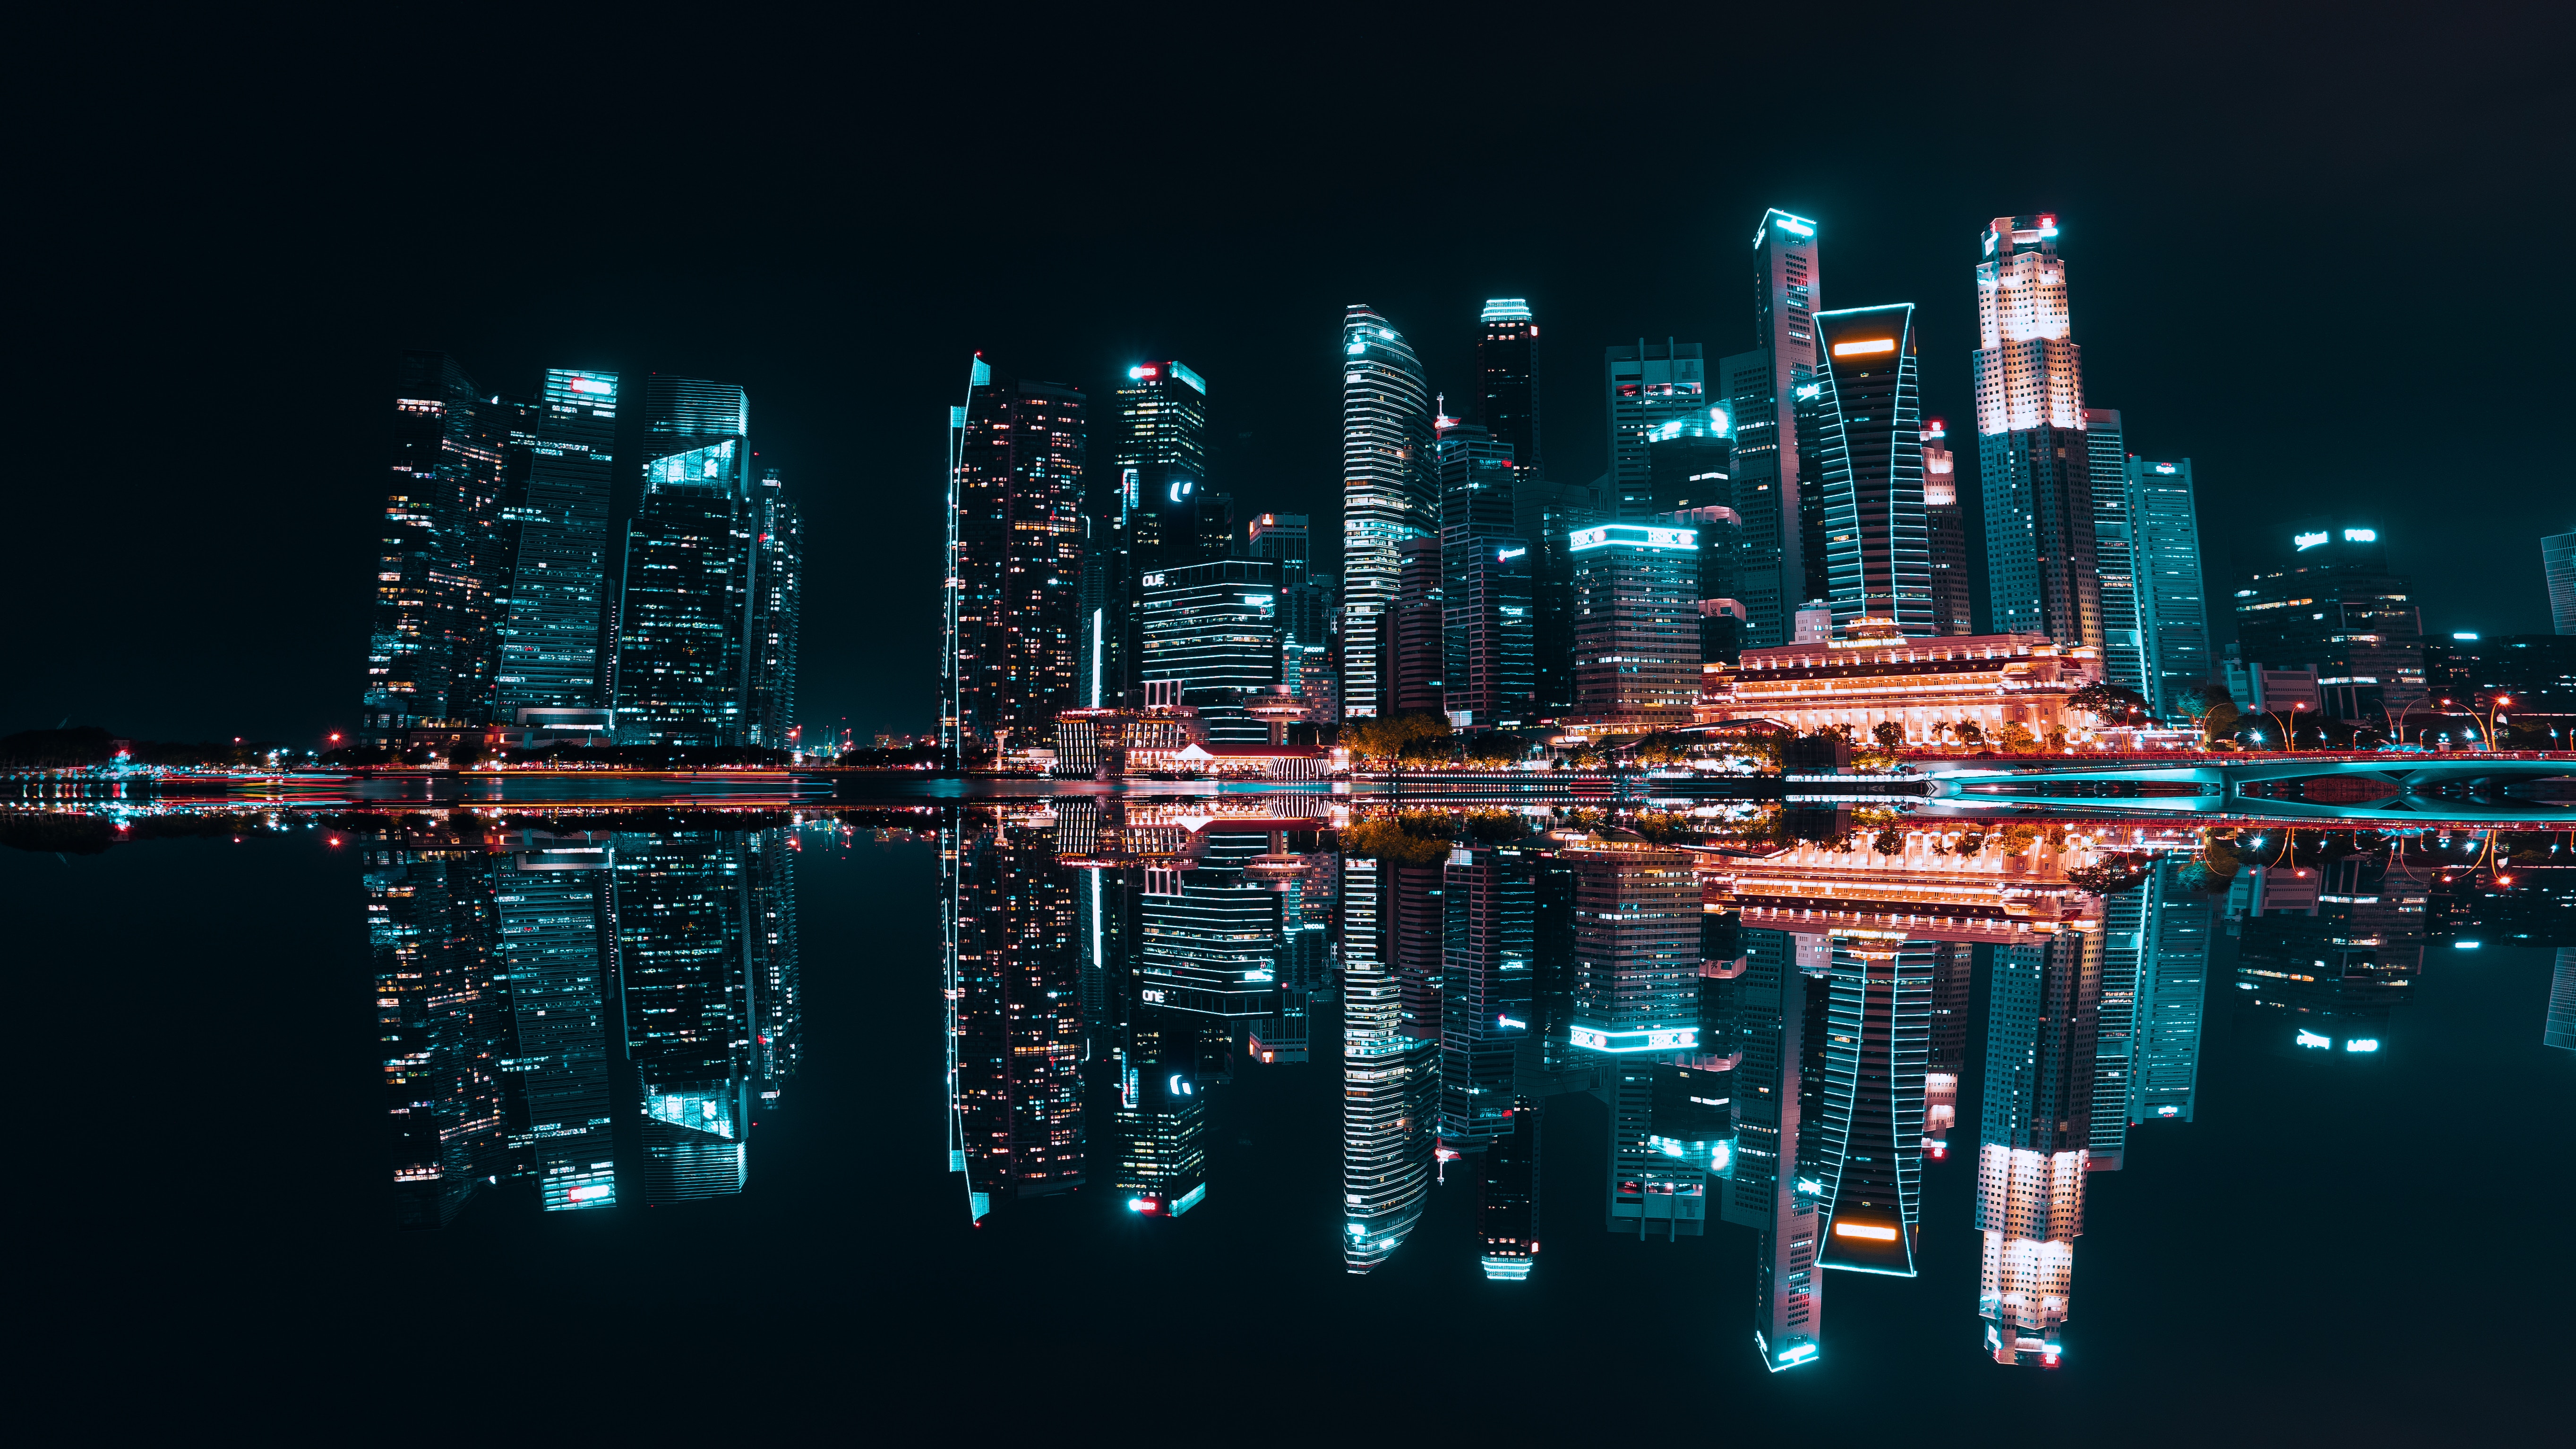 illumination, night city, cities, building, lake, reflection, skyscrapers, backlight, electricity 32K